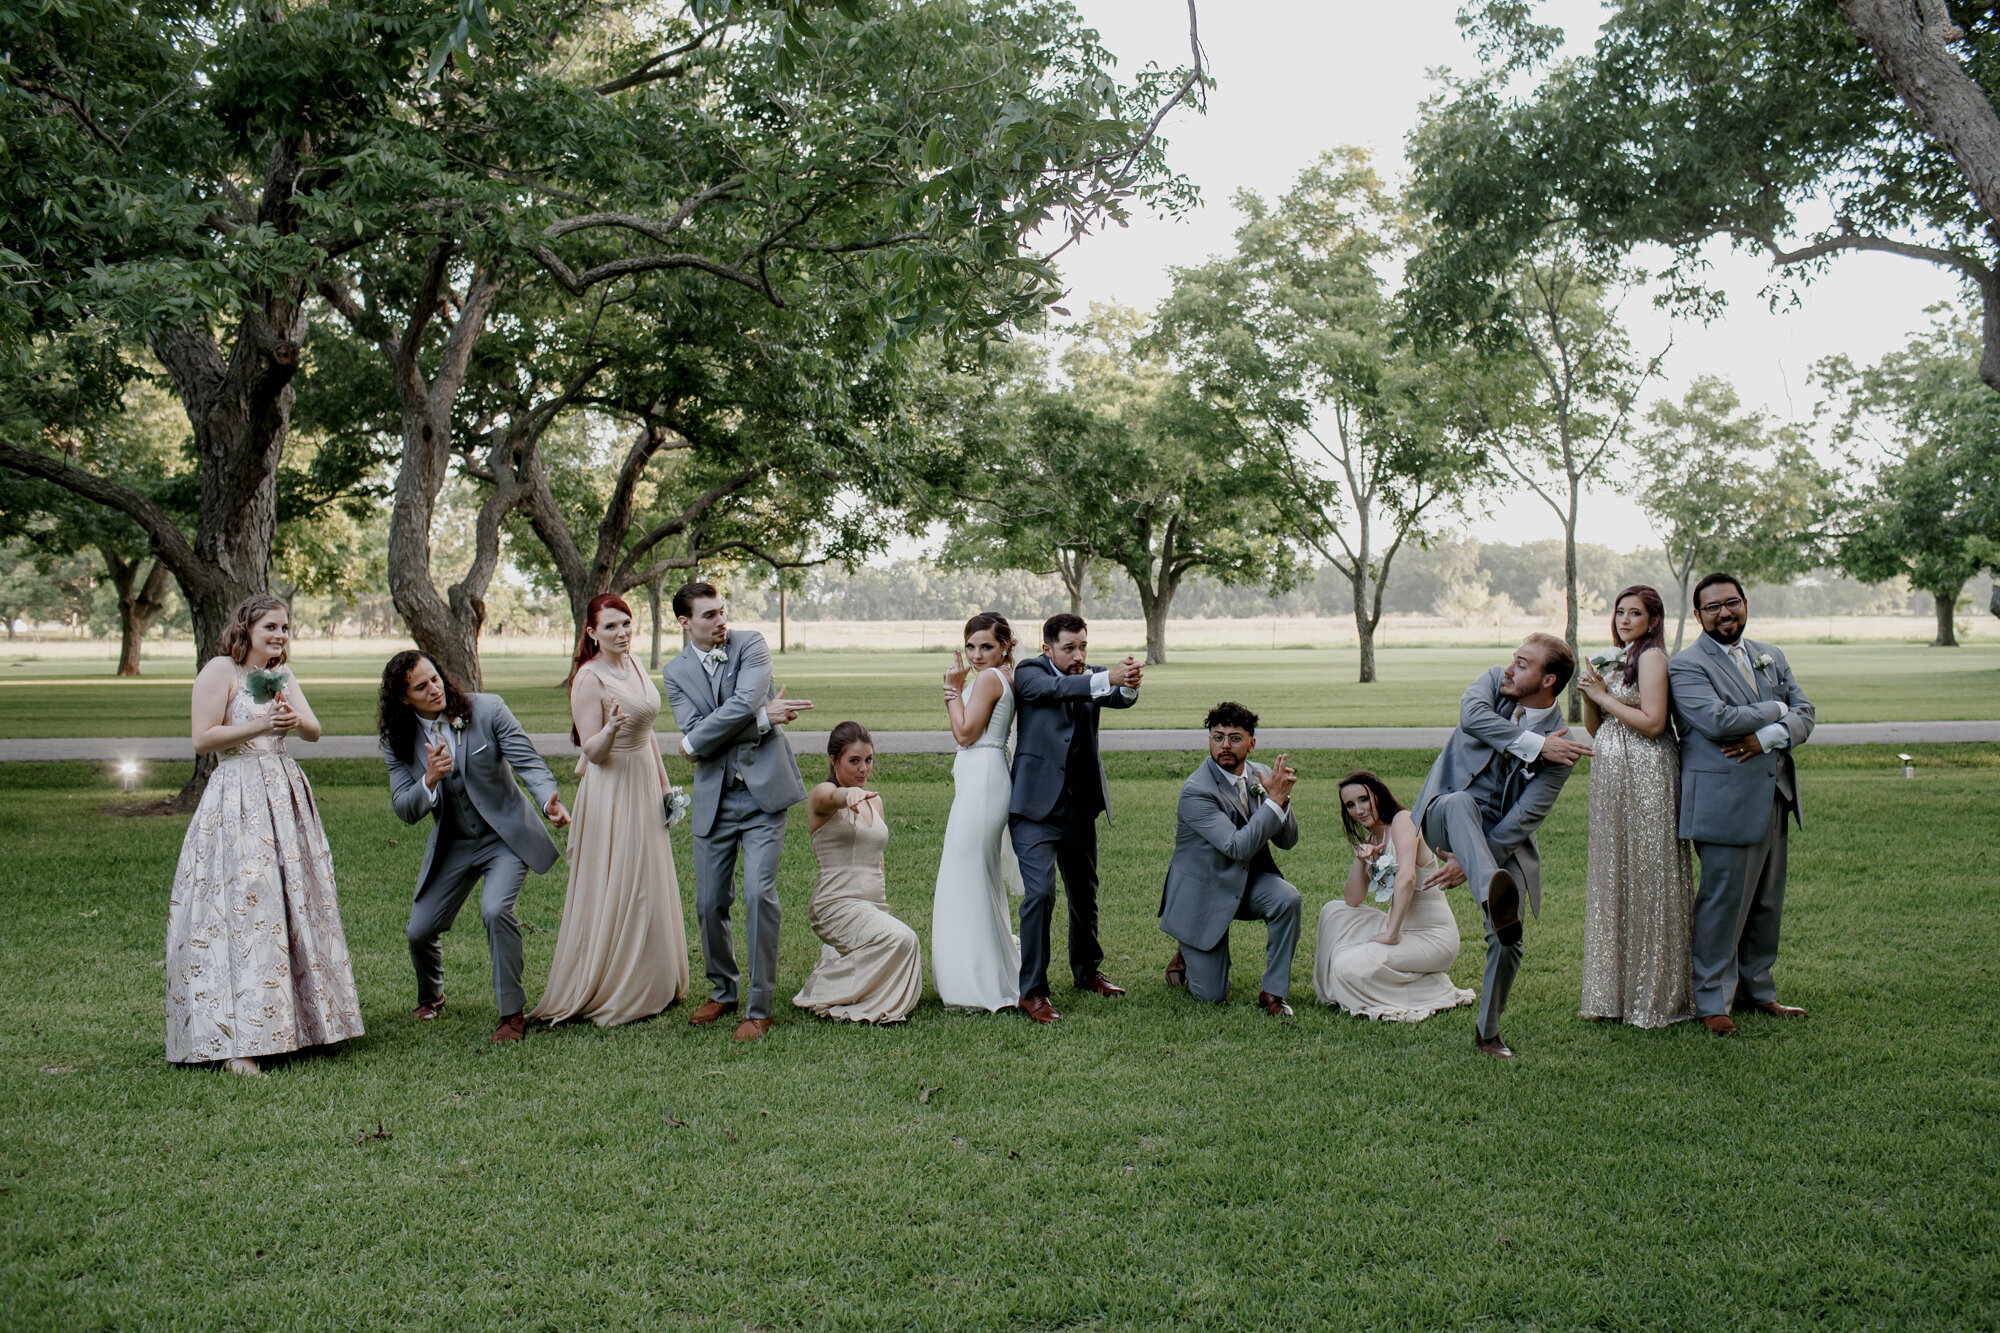 Bride and groom Charlie's Angels portraits with bridal party. Glowing Wedding in Golden Champagne Tones at The Orchard at Caney Creek in Wharton, TX